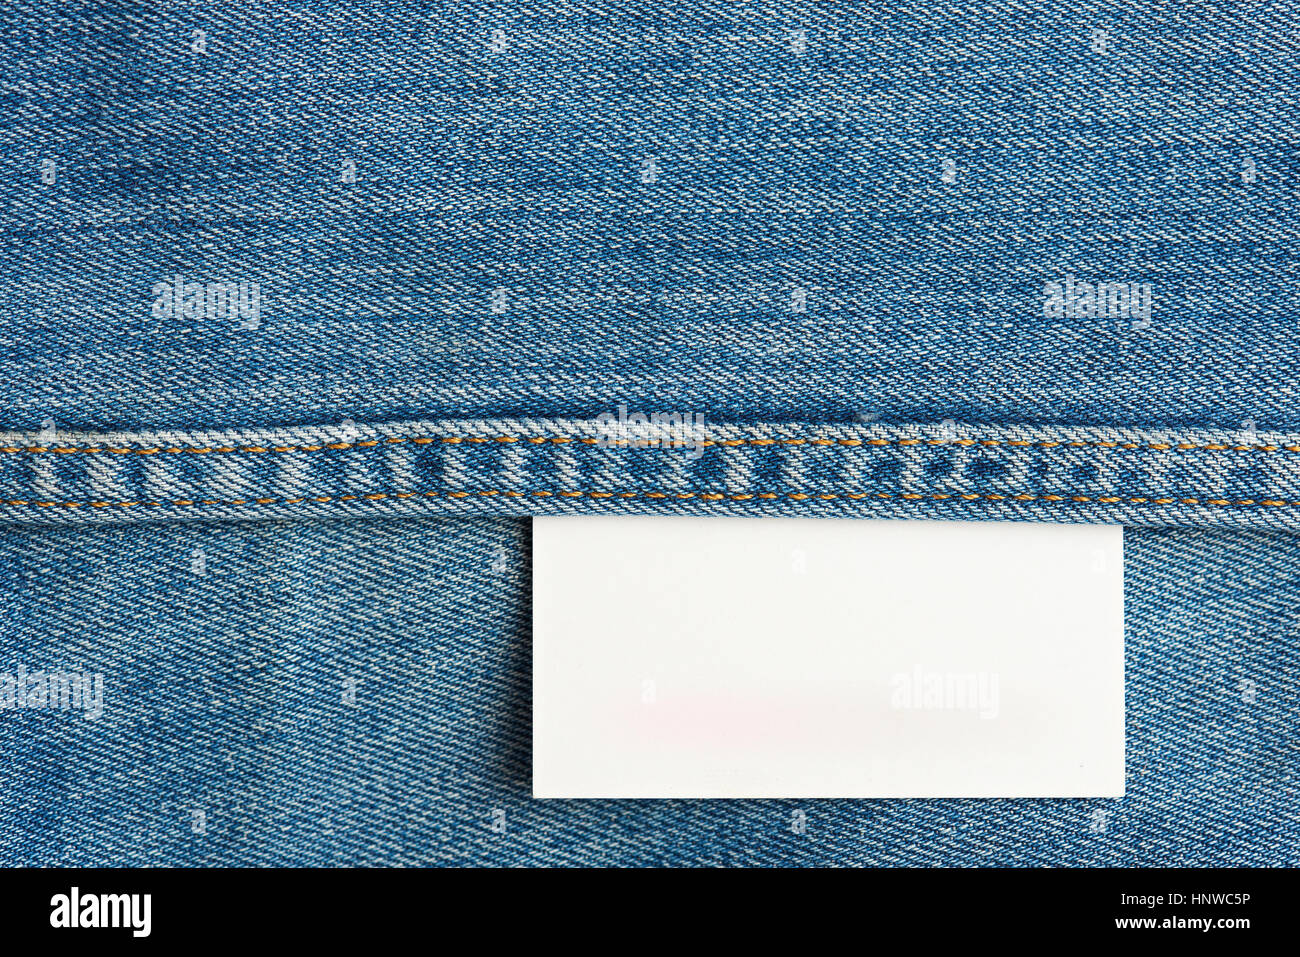 white jeans texture tag close up. Horizontal jeans background with stitches Stock Photo